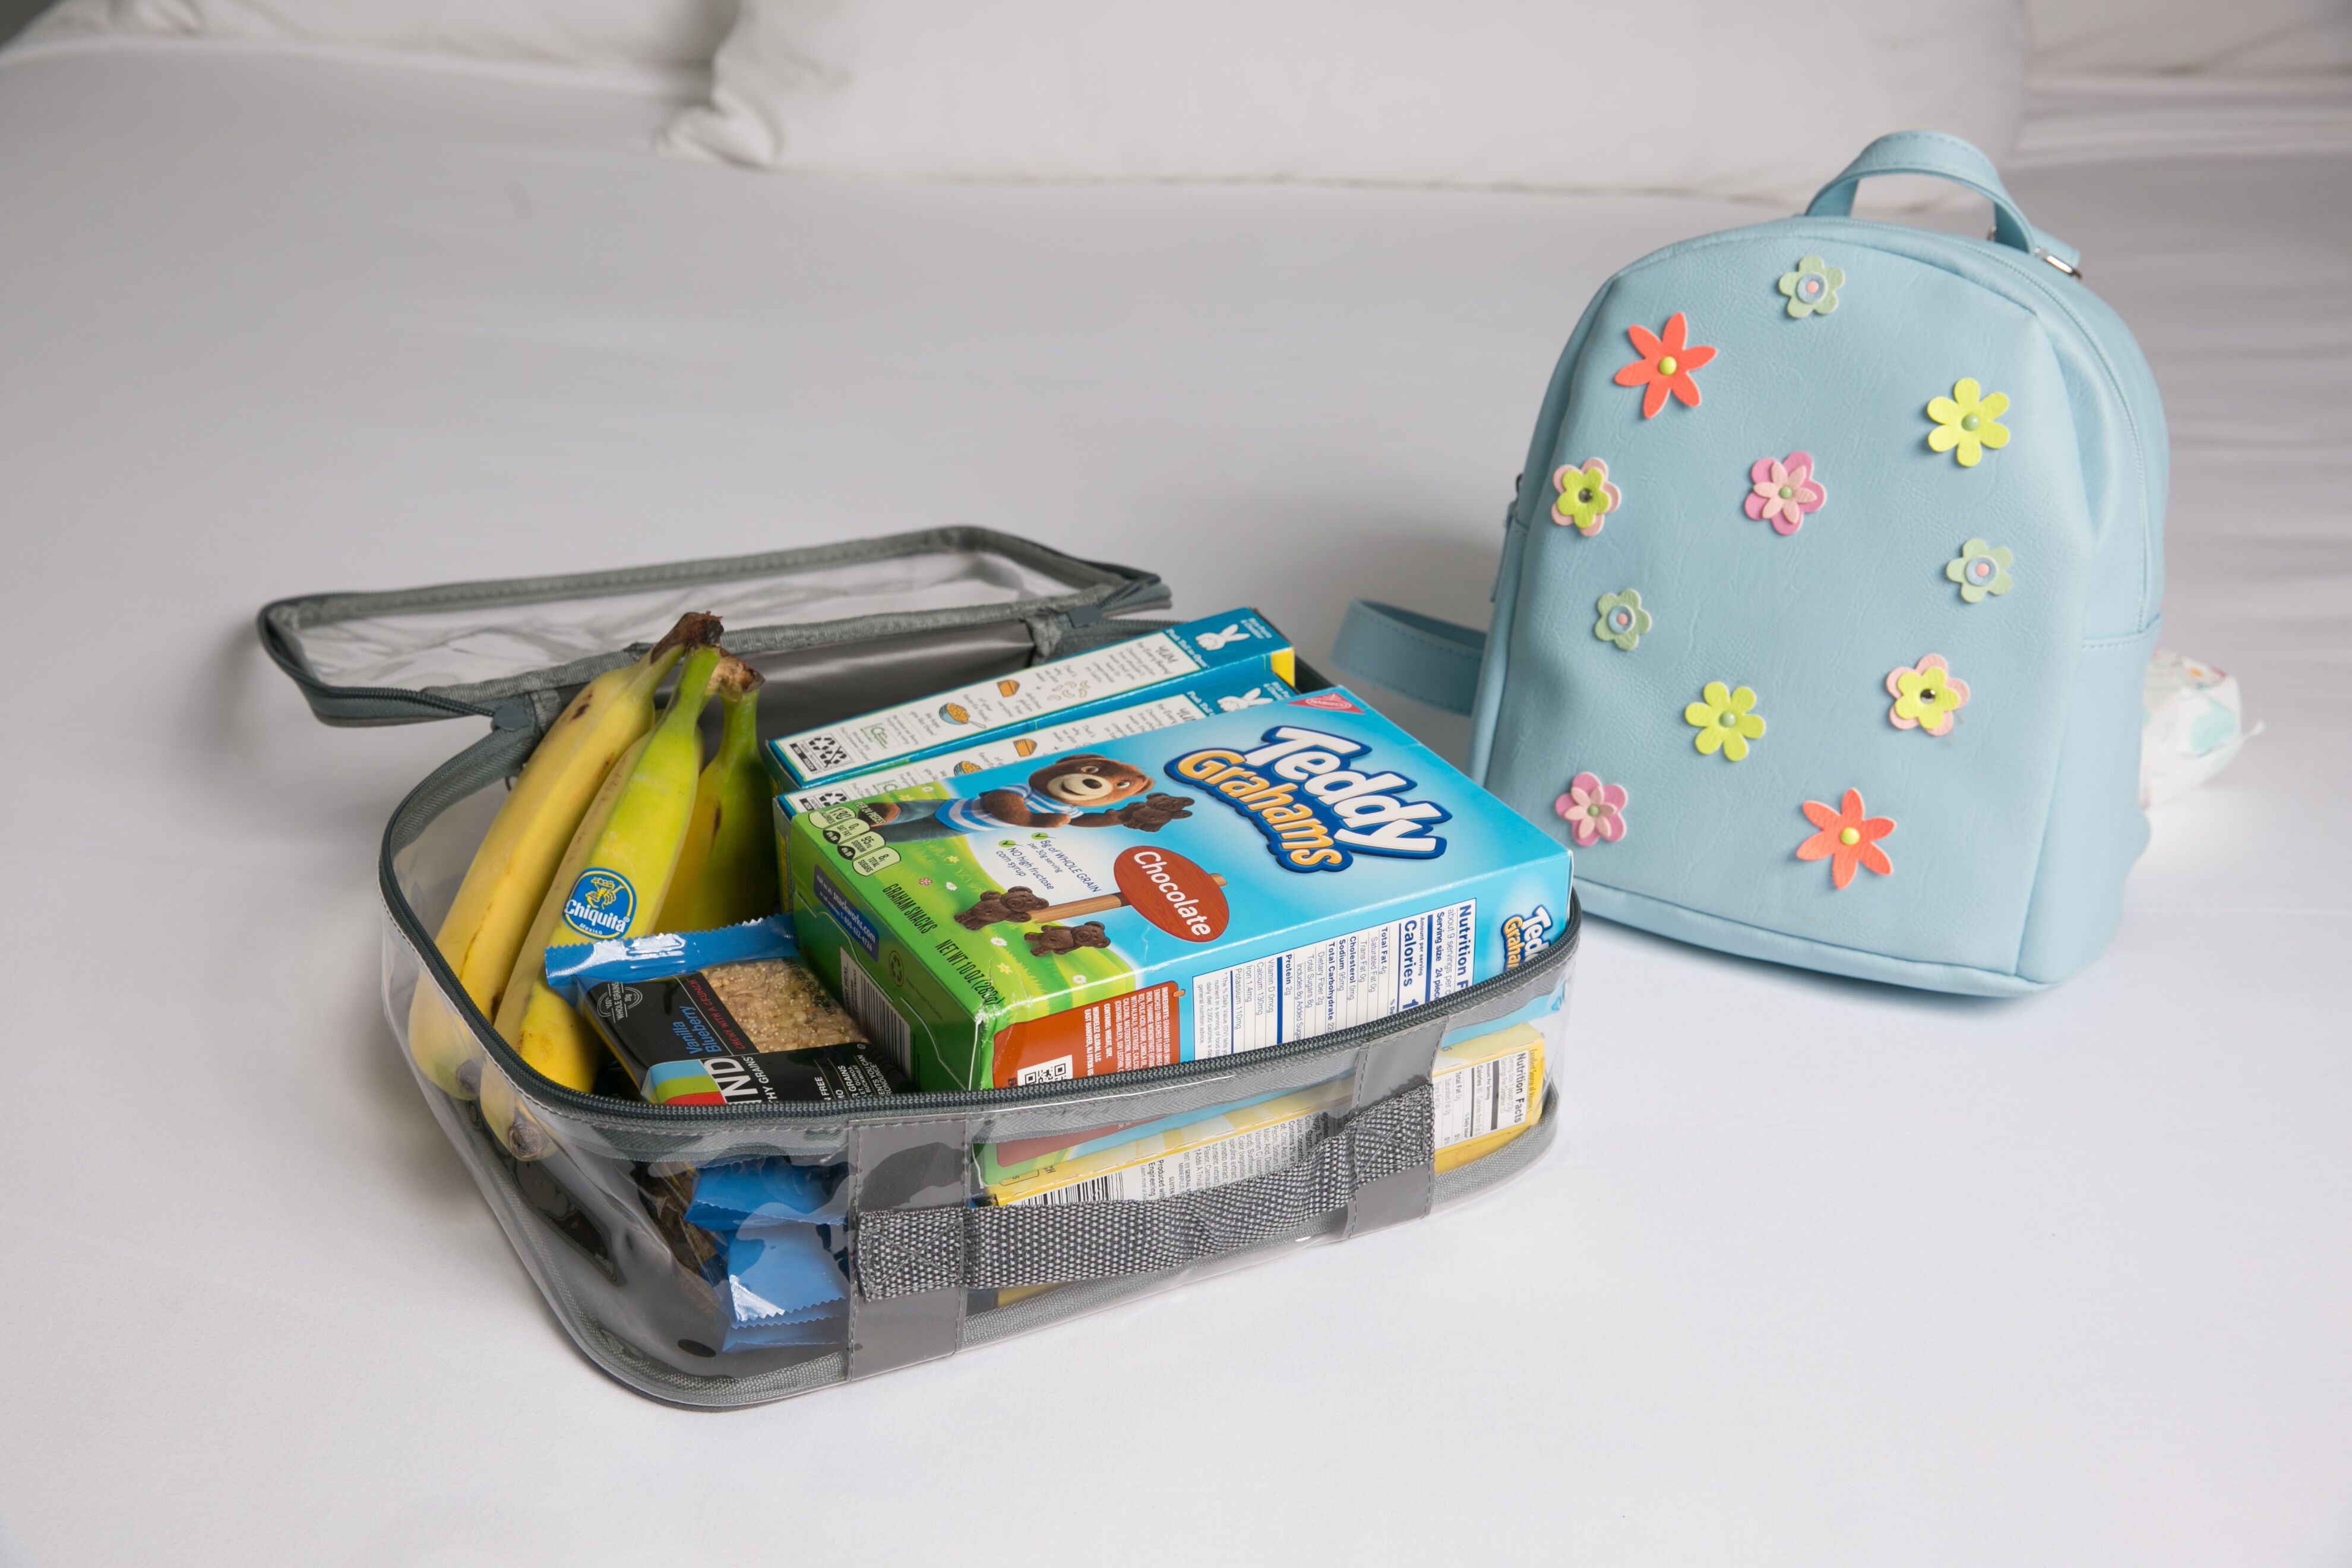 Kids snacks for backpacking trip in a clear packing cube